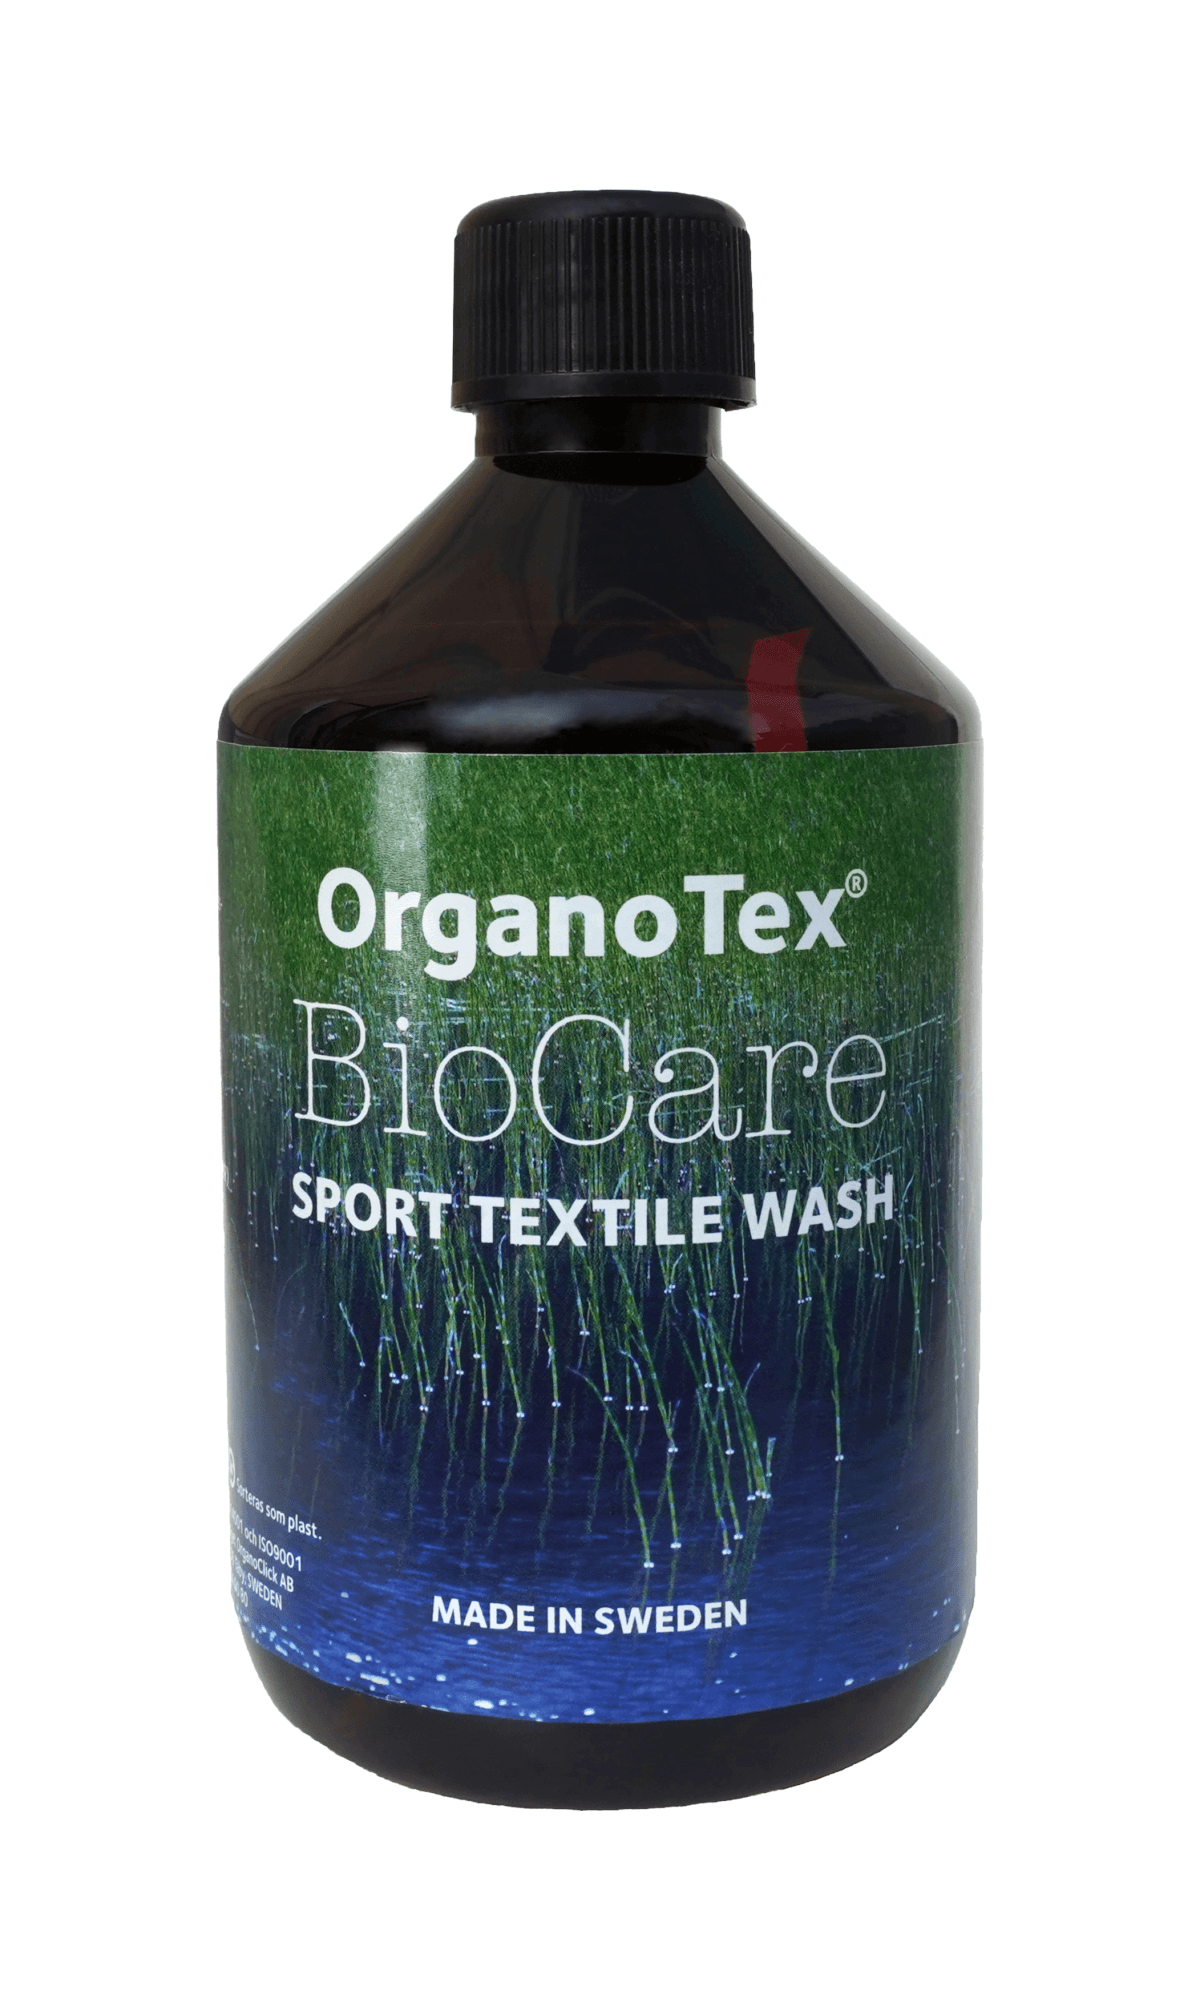 OrganoTex BioCare Sport Textile Wash - Biobased detergent Care products